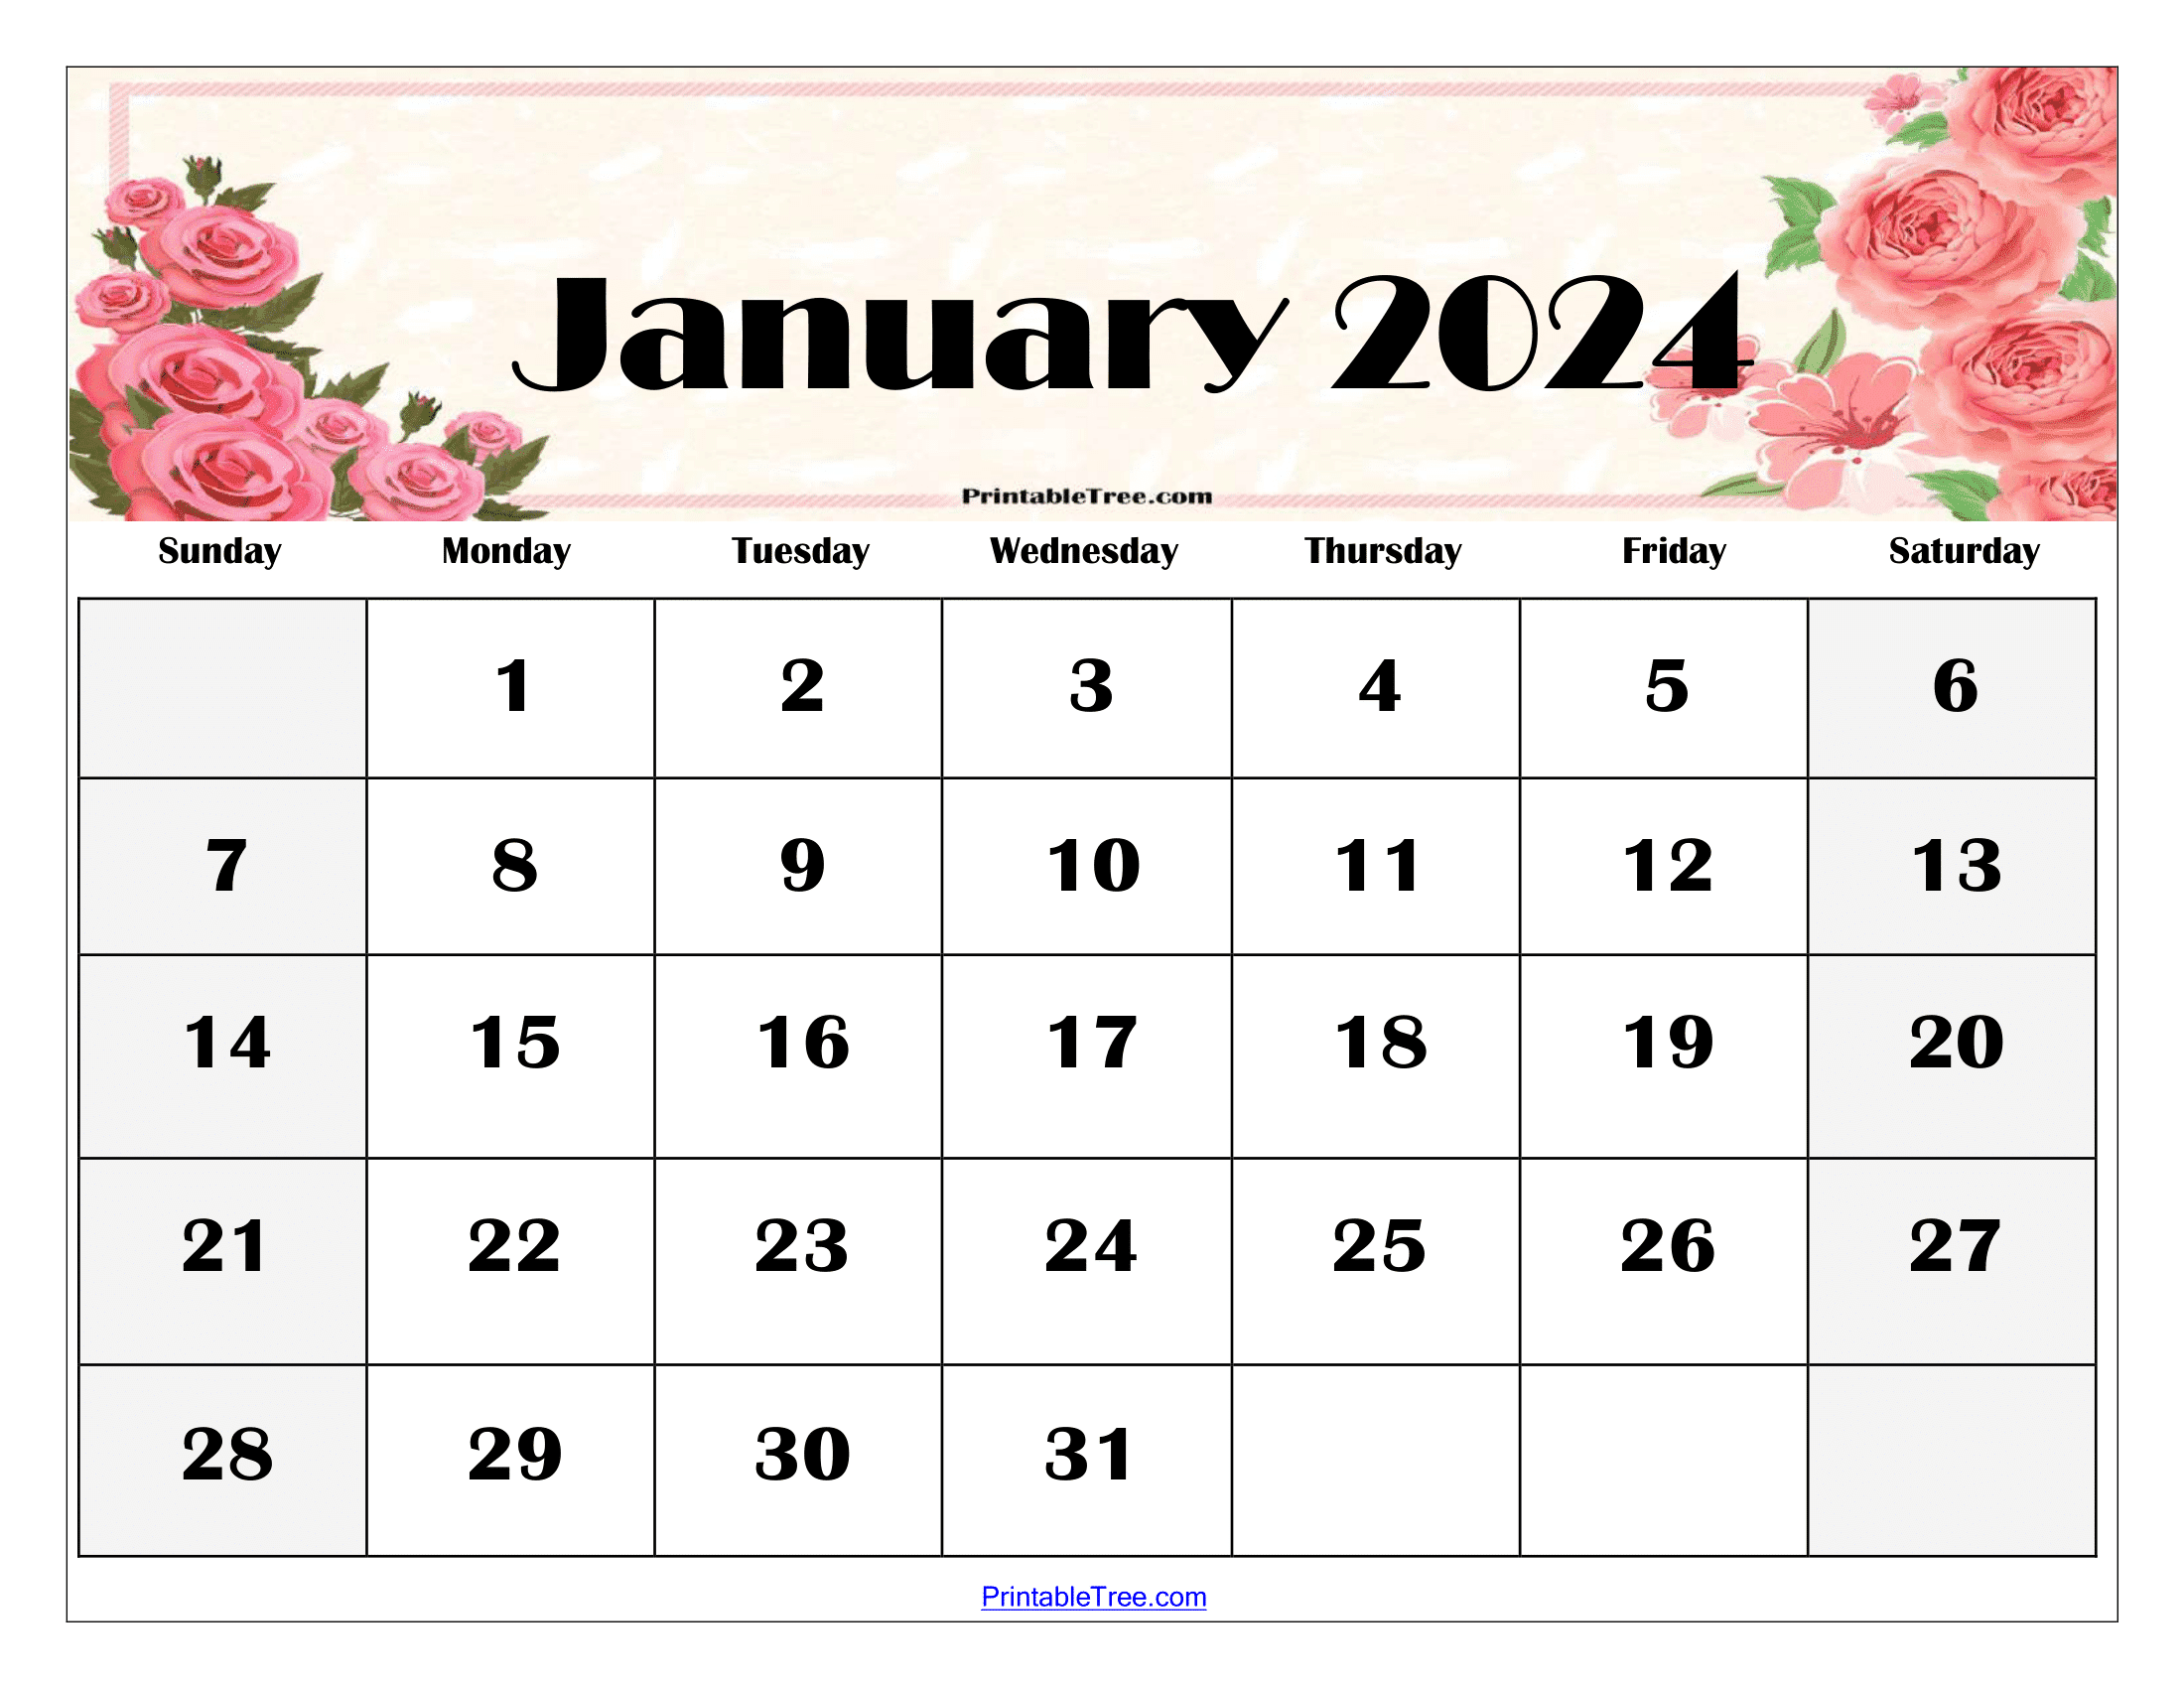 January 2024 Calendar Printable PDF Template With Holidays - Free Printable 2024 Monthly Calendar Floral